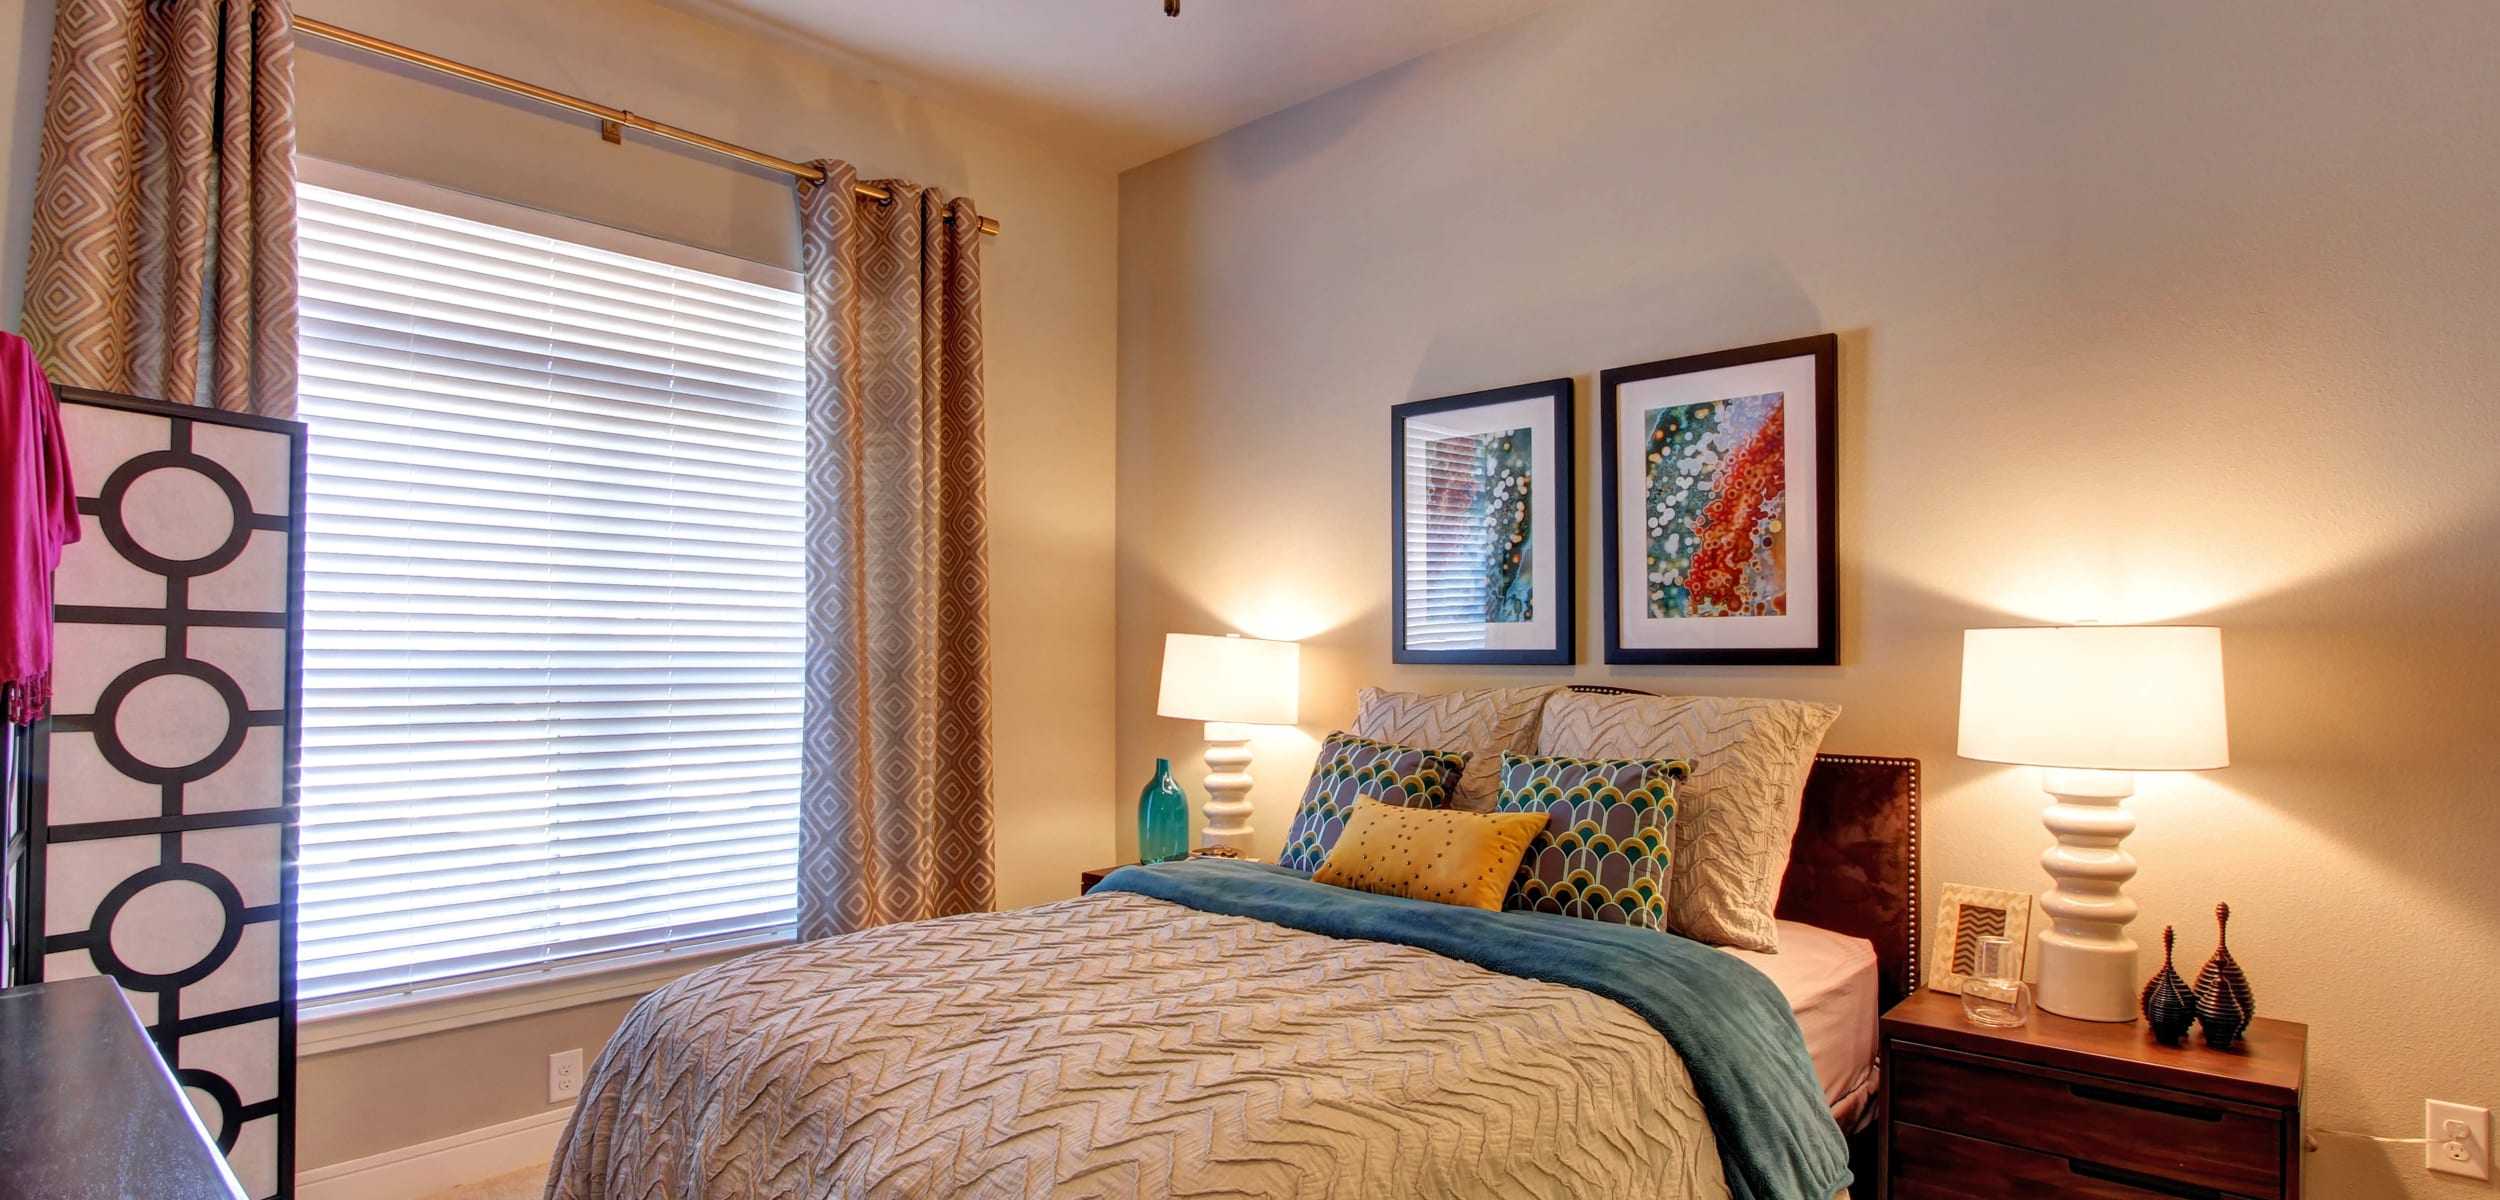 Carpeted bedroom with large window at Marquis at Barton Trails in Austin, Texas